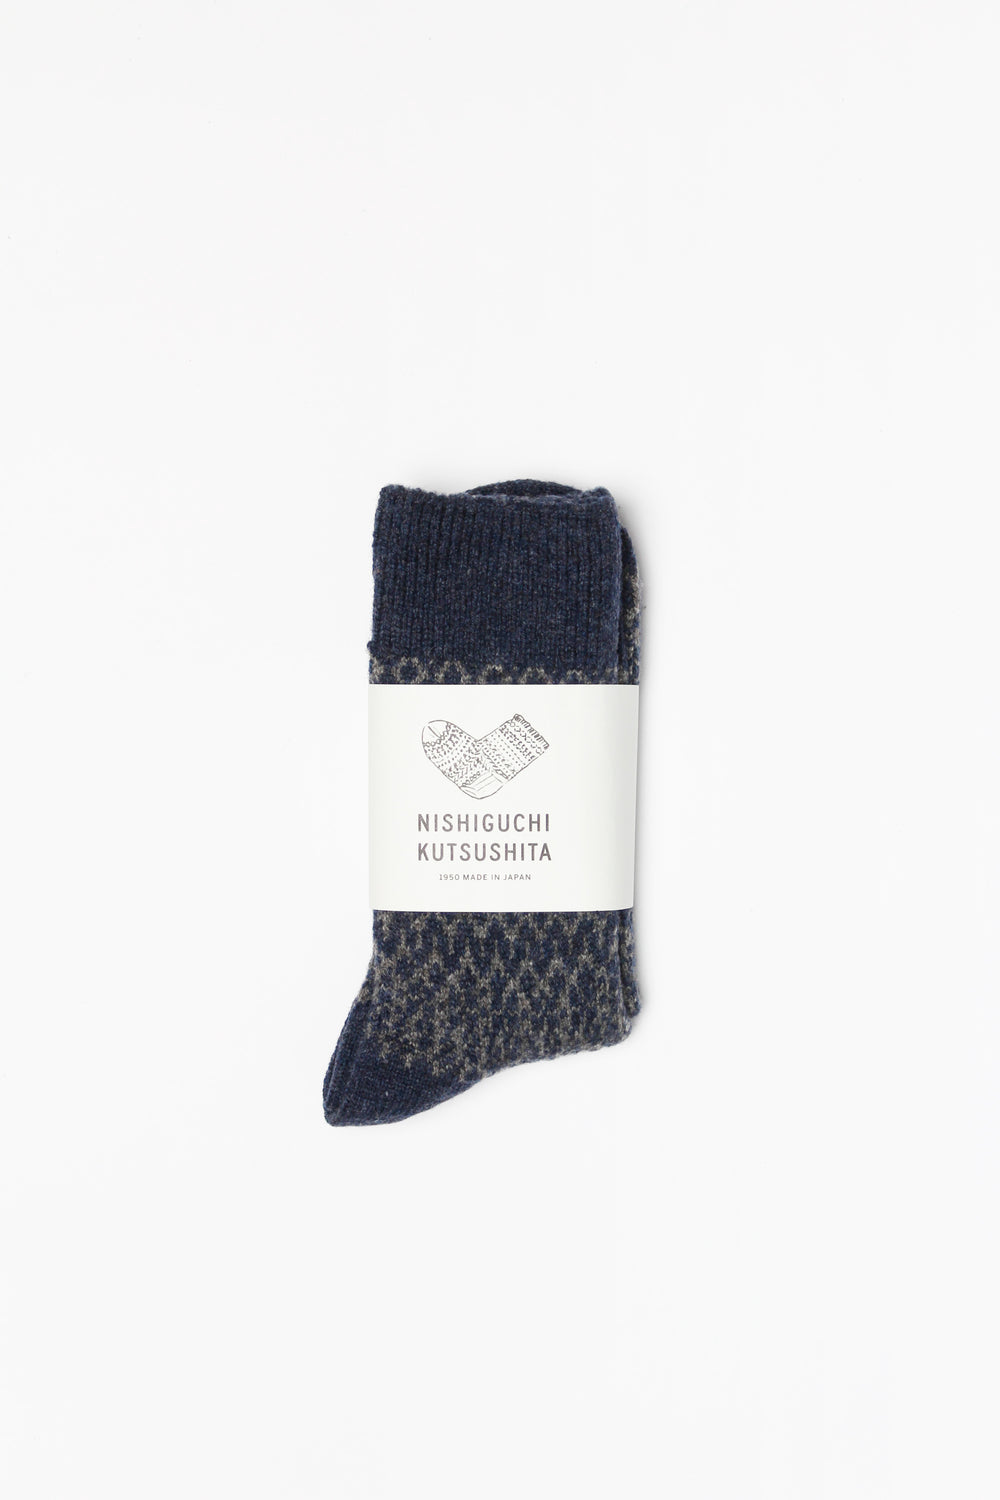 Wool Jacquard Socks, Navy with Grey (Size M + L Only)